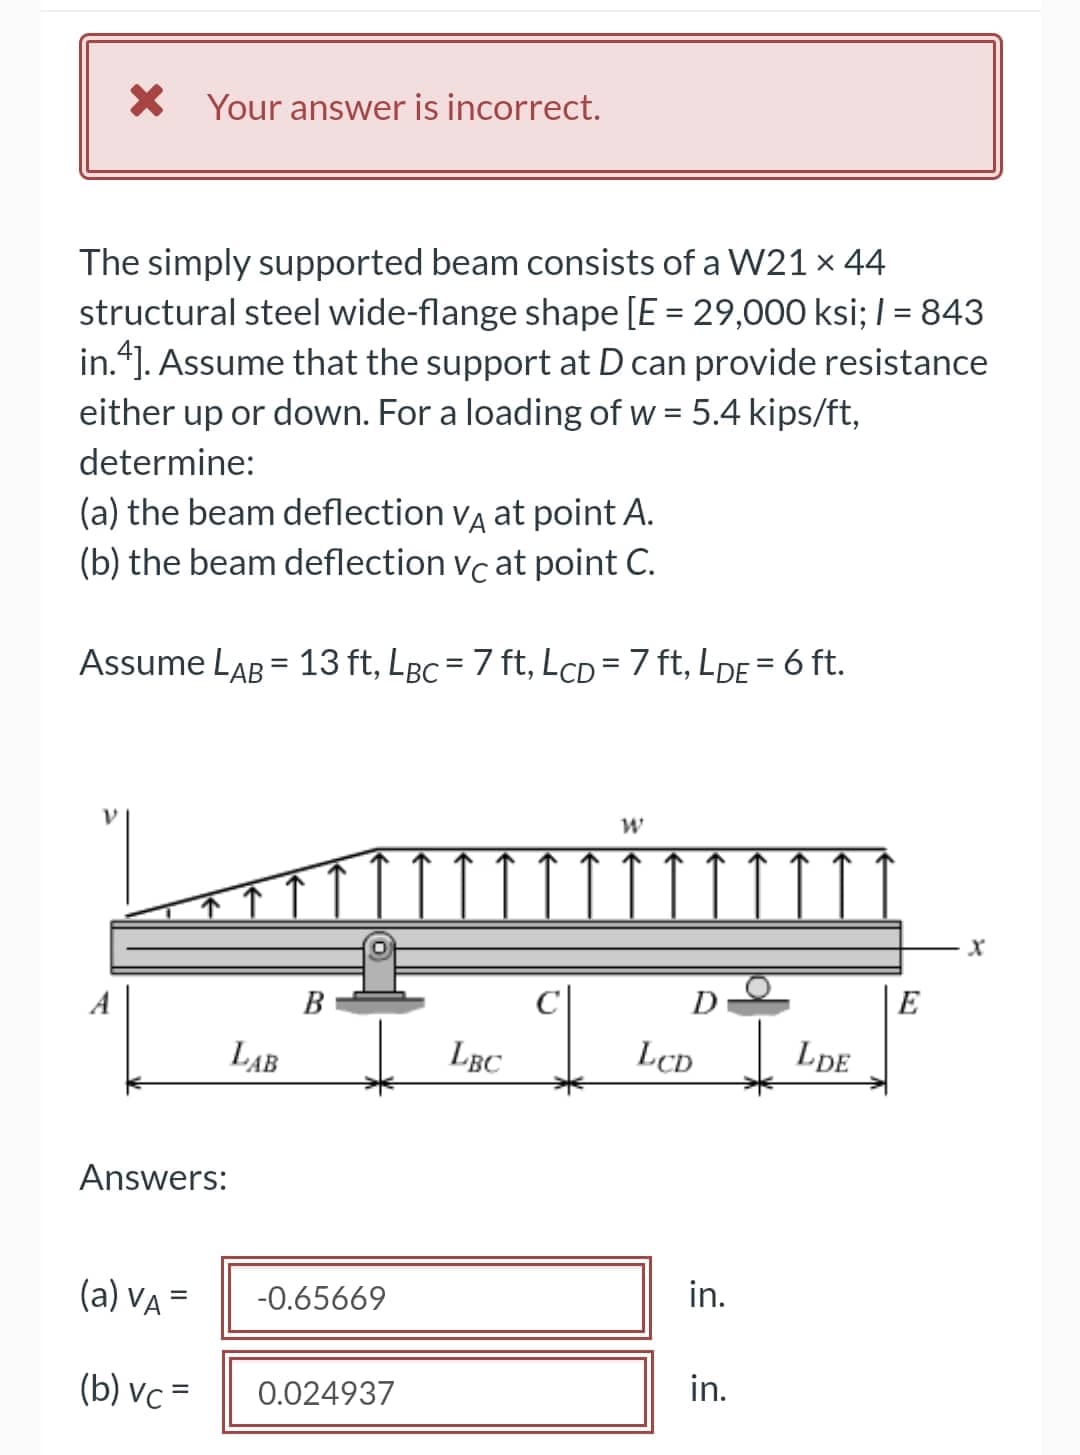 X Your answer is incorrect.
The simply supported beam consists of a W21 x 44
structural steel wide-flange shape [E = 29,000 ksi; I = 843
in.“]. Assume that the support at D can provide resistance
%3D
either up or down. For a loading of w = 5.4 kips/ft,
determine:
(a) the beam deflection vg at point A.
(b) the beam deflection vc at point C.
Assume LAB = 13 ft, LBc = 7 ft, LcD =7 ft, LDE = 6 ft.
%3D
A
B
E
LAB
LBC
LcD
LCD
Lpe
Answers:
(a) VA =
-0.65669
in.
(b) vc =
0.024937
in.
